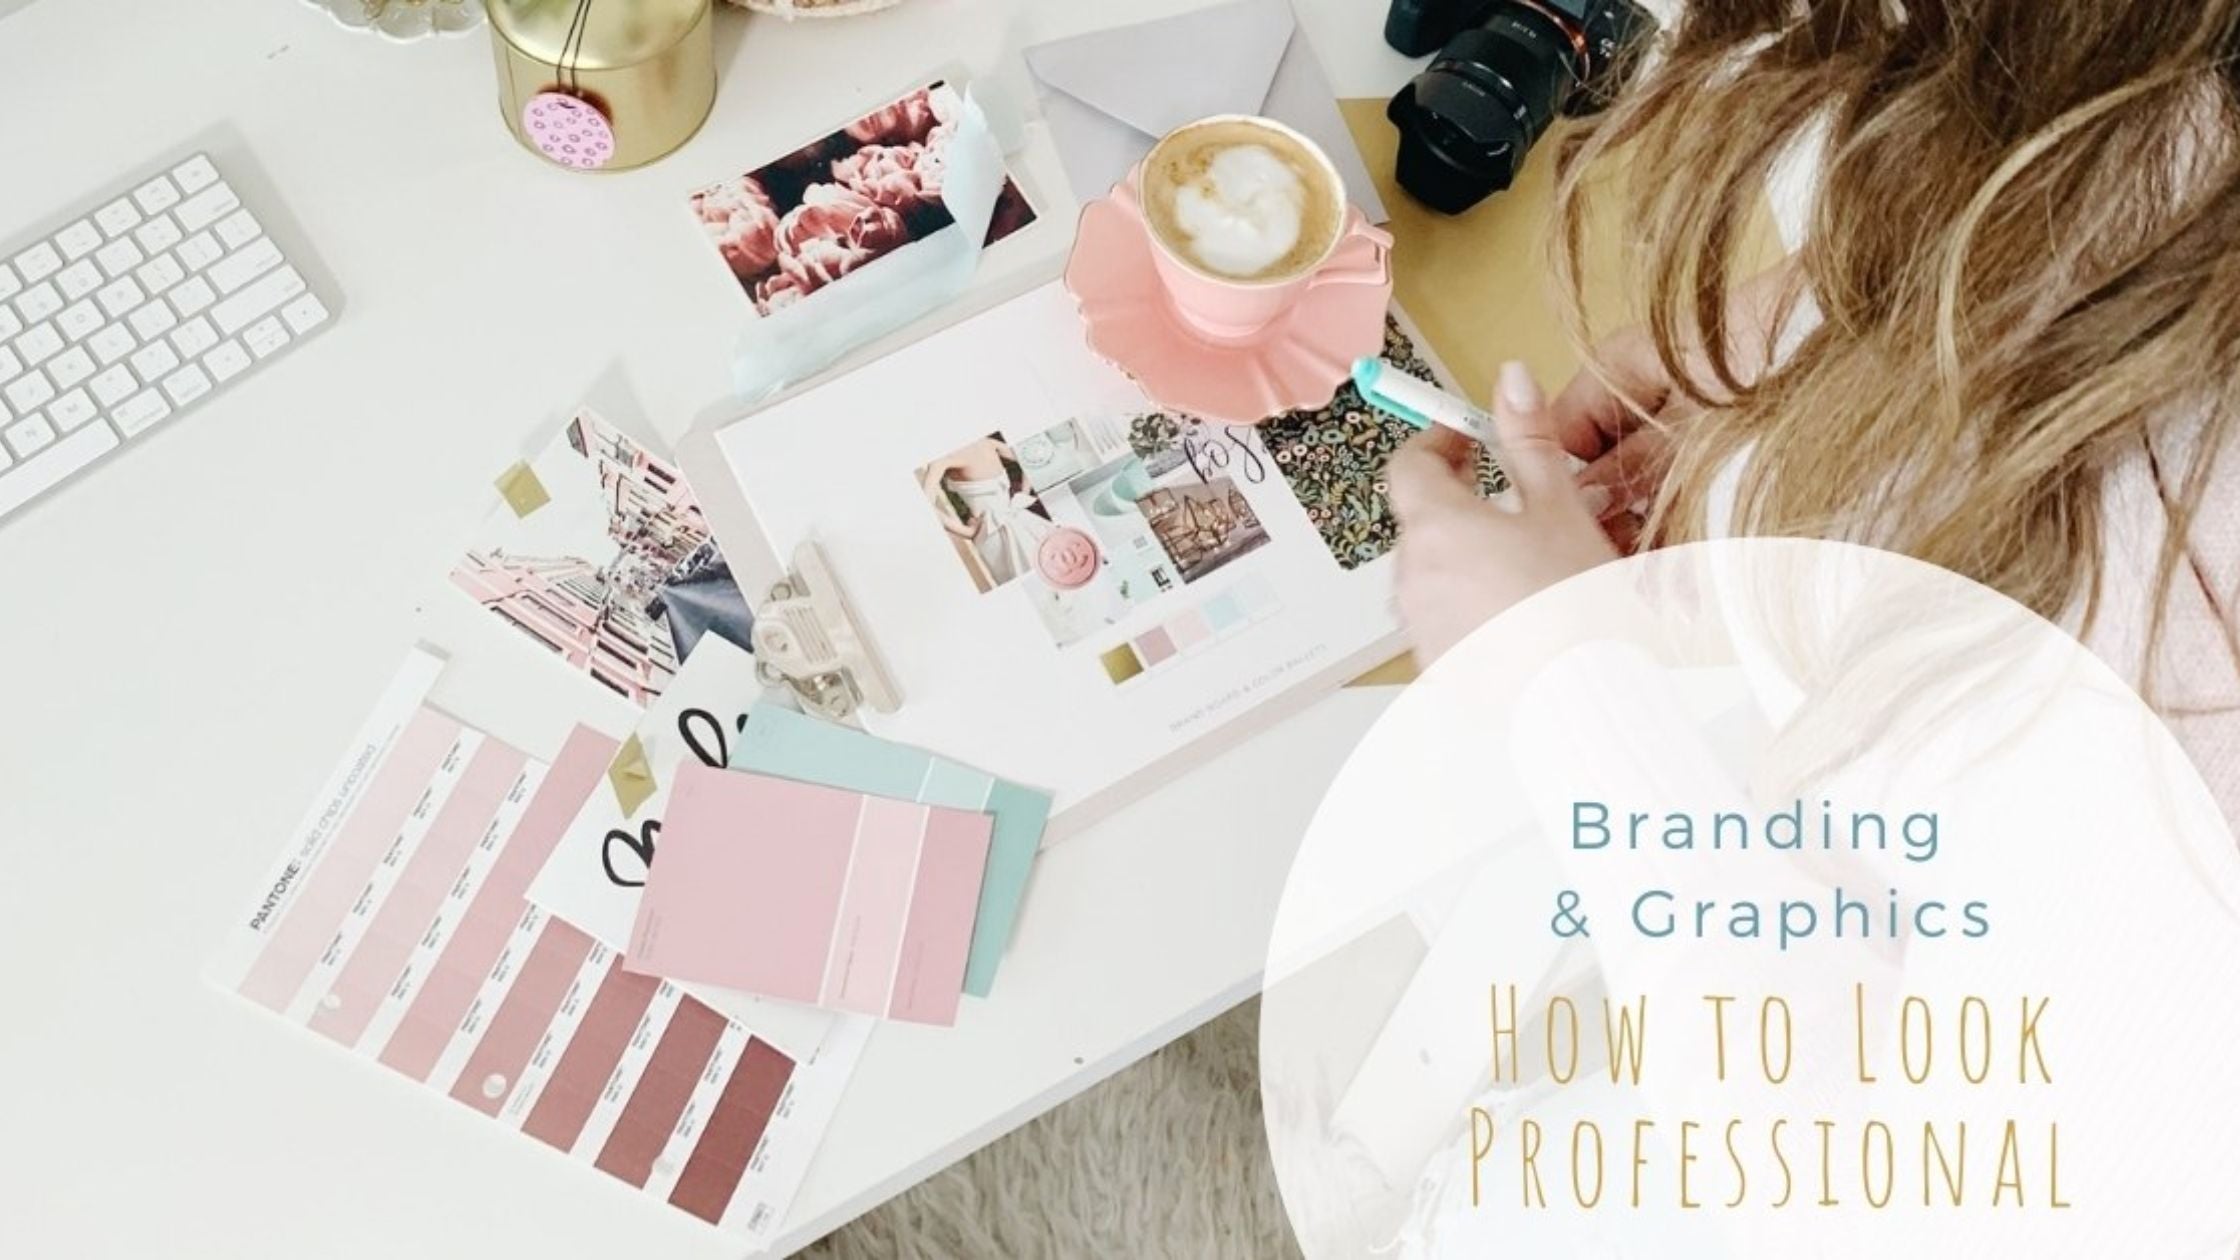 Branding & Graphics: How to Look Professional